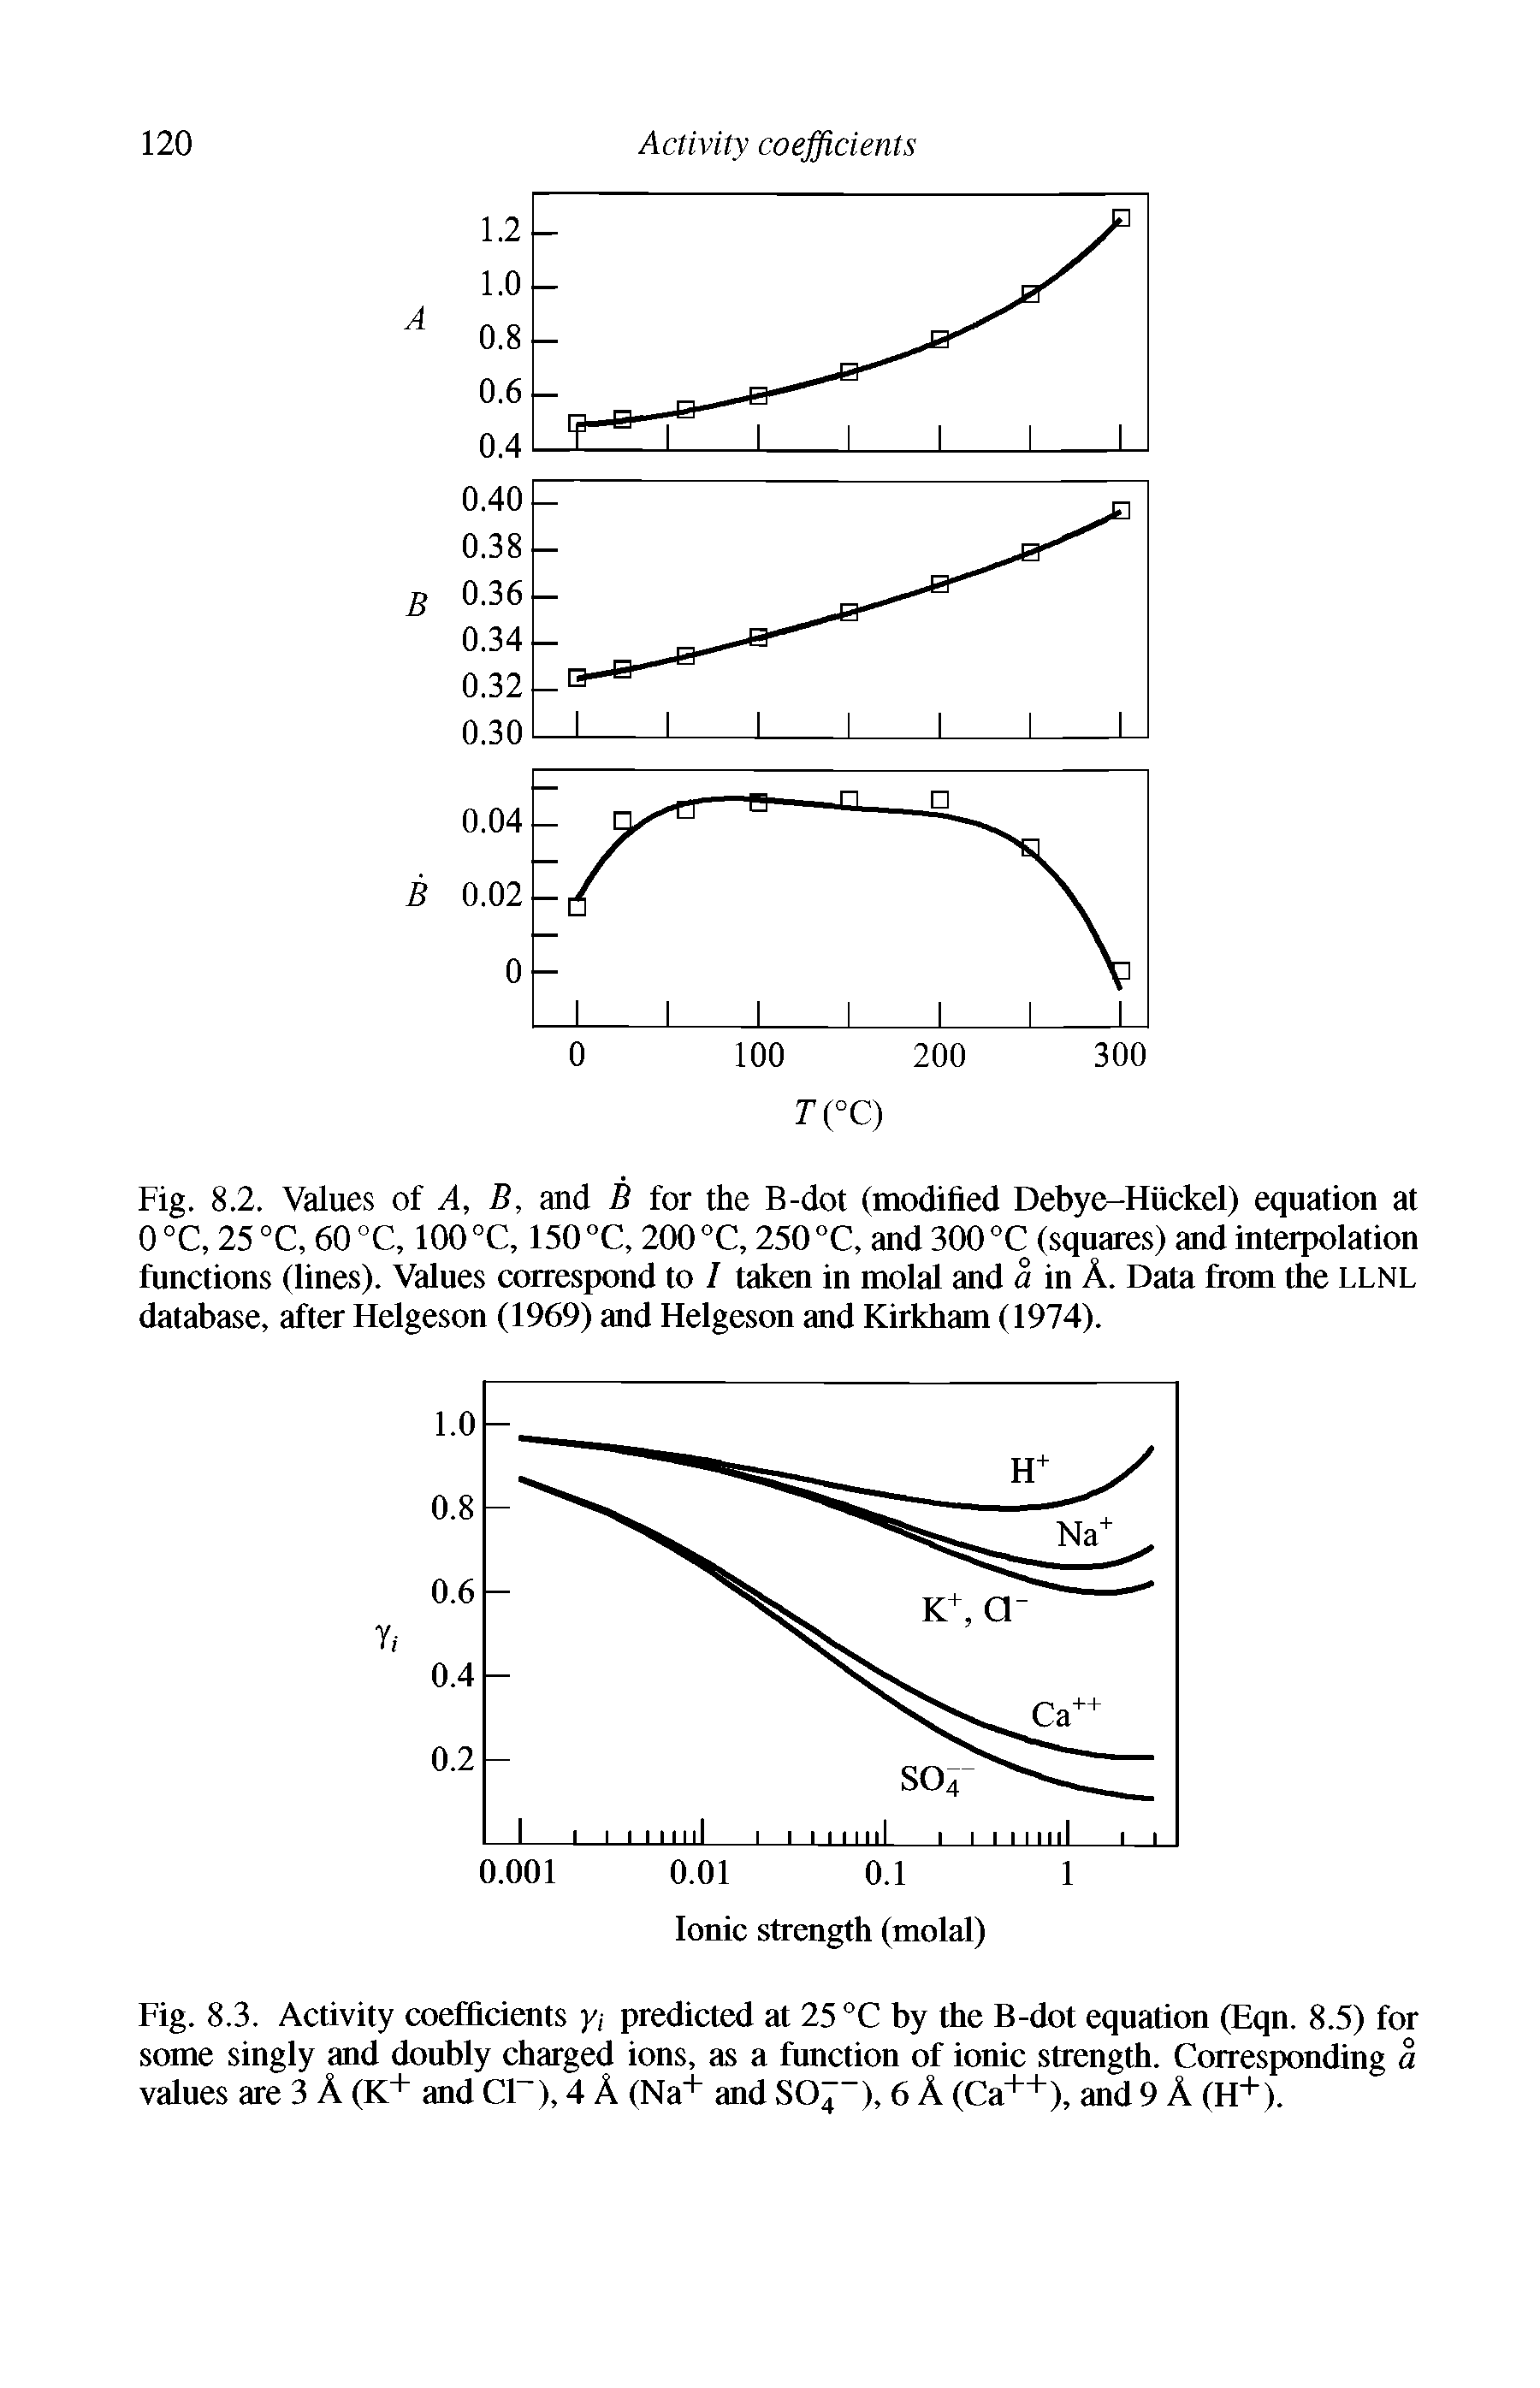 Fig. 8.2. Values of A, B, and B for the B-dot (modified Debye-Huckel) equation at 0 °C, 25 °C, 60 °C, 100 °C, 150 °C, 200 °C, 250 °C, and 300 °C (squares) and interpolation functions (lines). Values correspond to I taken in molal and a in A. Data from the LLNL database, after Helgeson (1969) and Helgeson and Kirkham (1974).